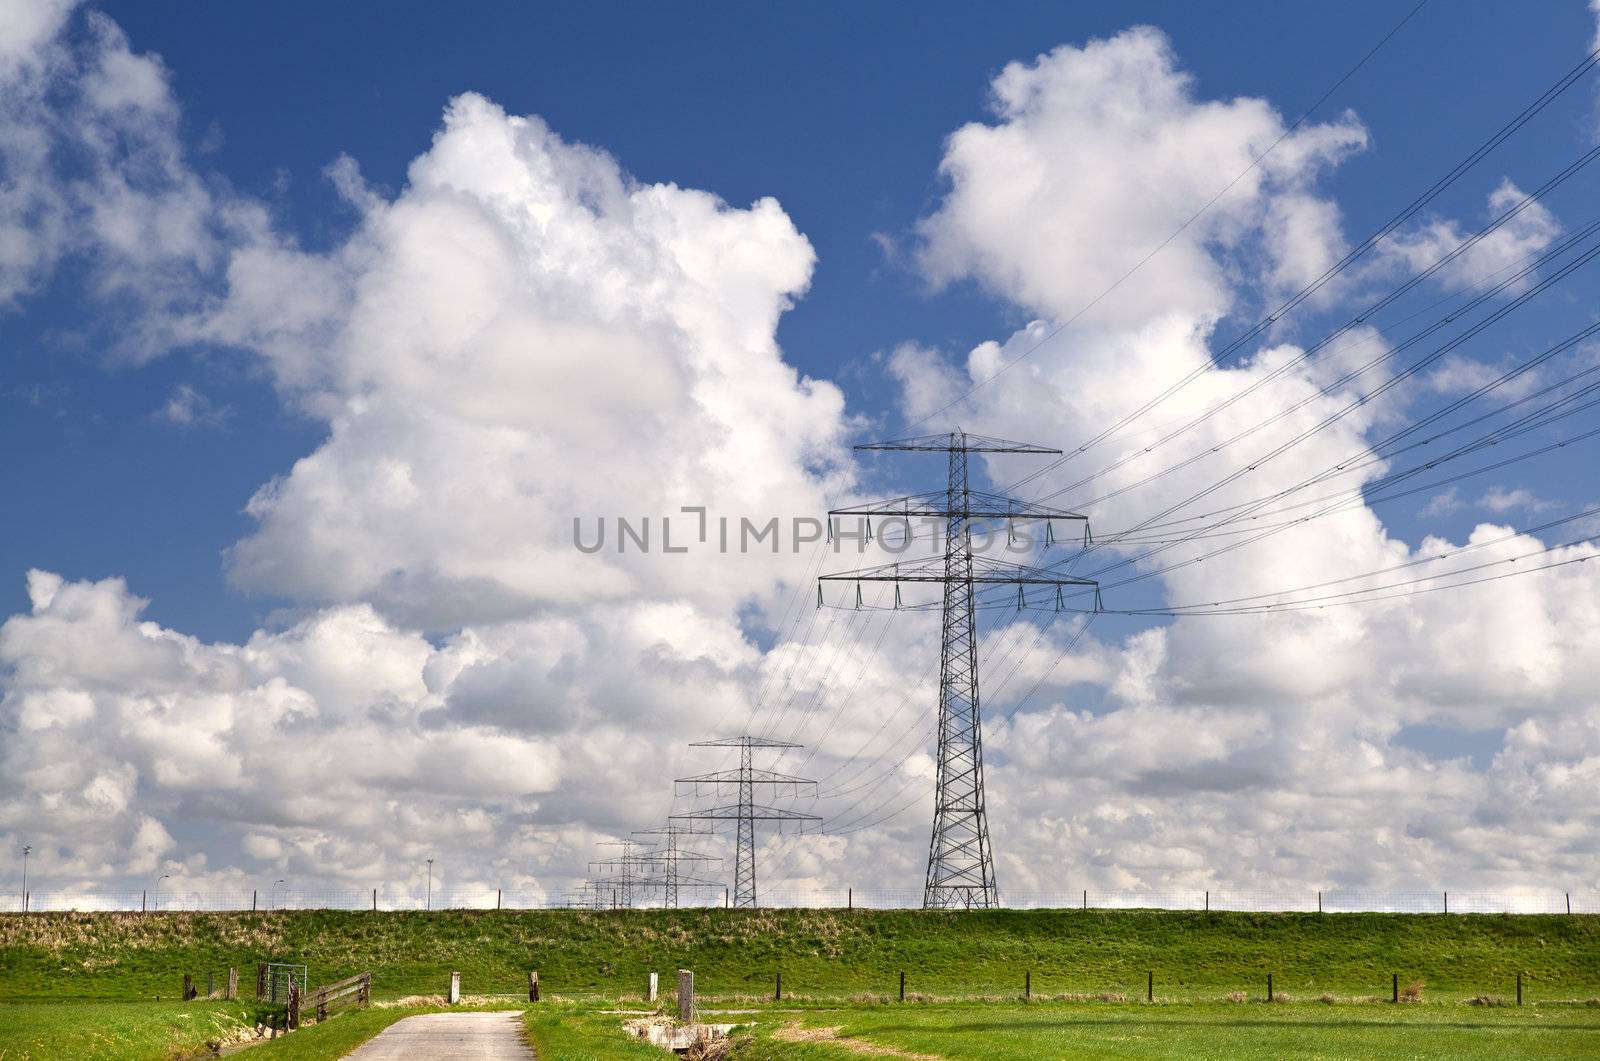 plain Dutch landscape with high-voltage line and beautiful blue sky with puffy white clouds